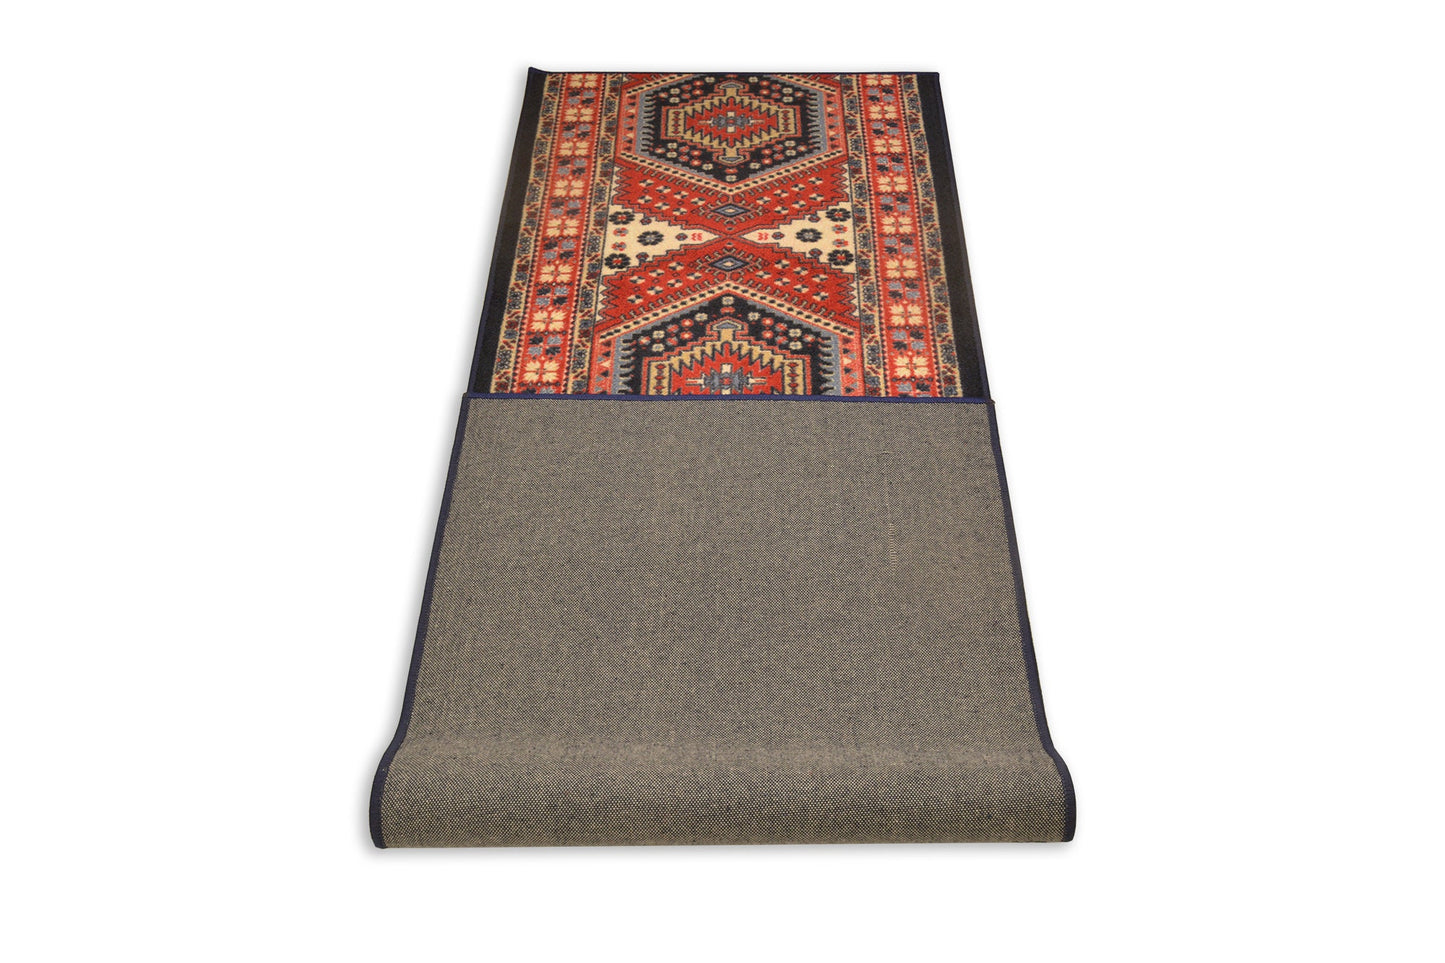 Custom Size Runner Rug Antique Oriental Turkish Kilim Design Canvas Backing Pick Your Own Size By Up to 50 Ft Length, 26" or 35" Width